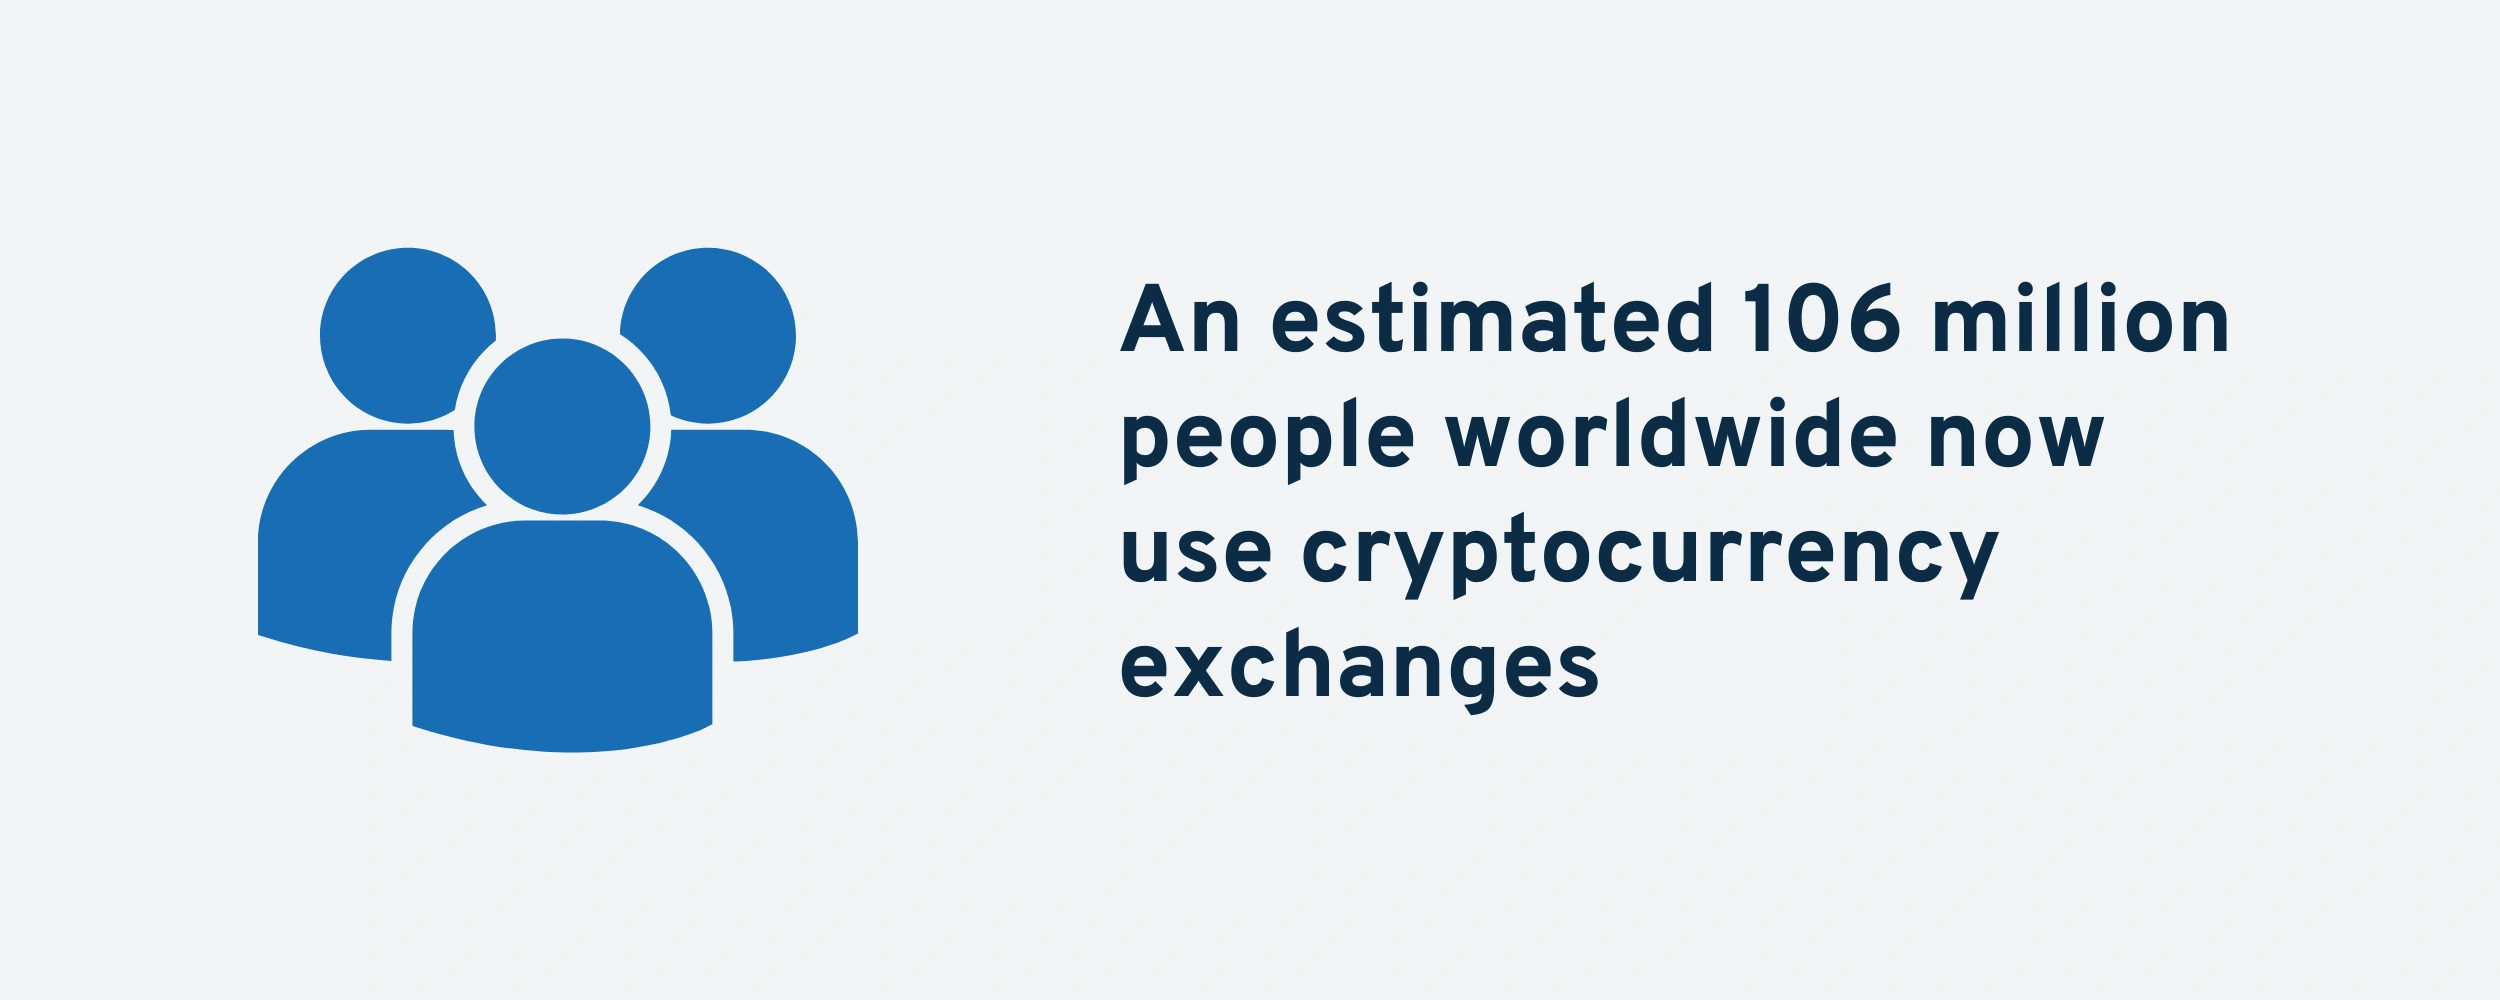 cryptocurrency-exchanges-usage-min.png